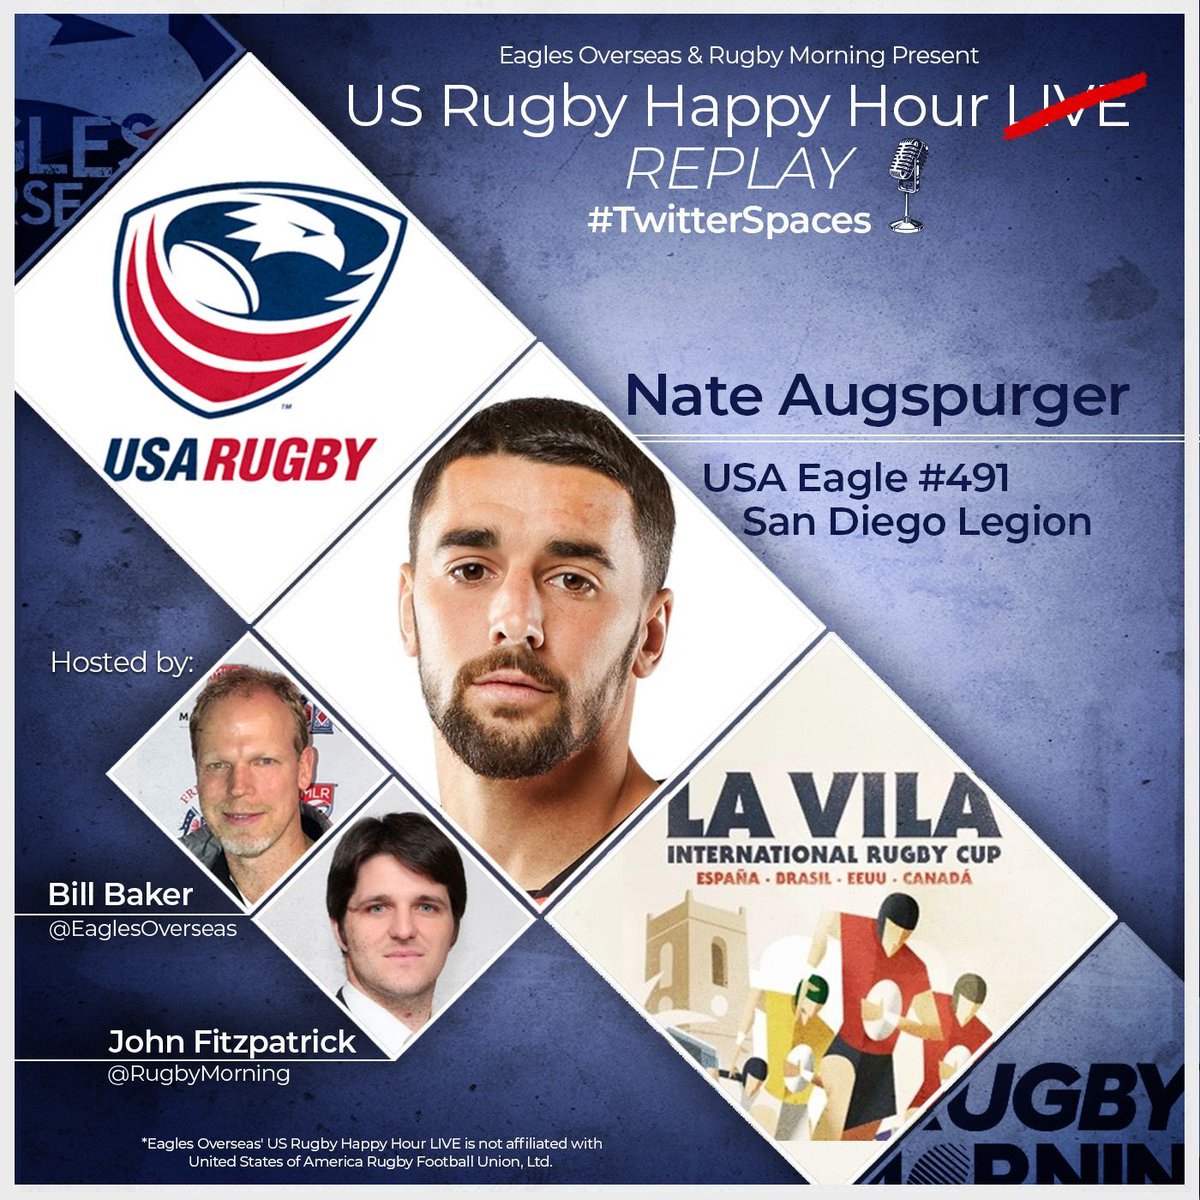 Shout out to USA Eagle and San Diego Legion Nate Augspurger - Great conversation today about VILA International Cup, USA Rugby and MLR! You missed it? The podcast replay drops Thursday.